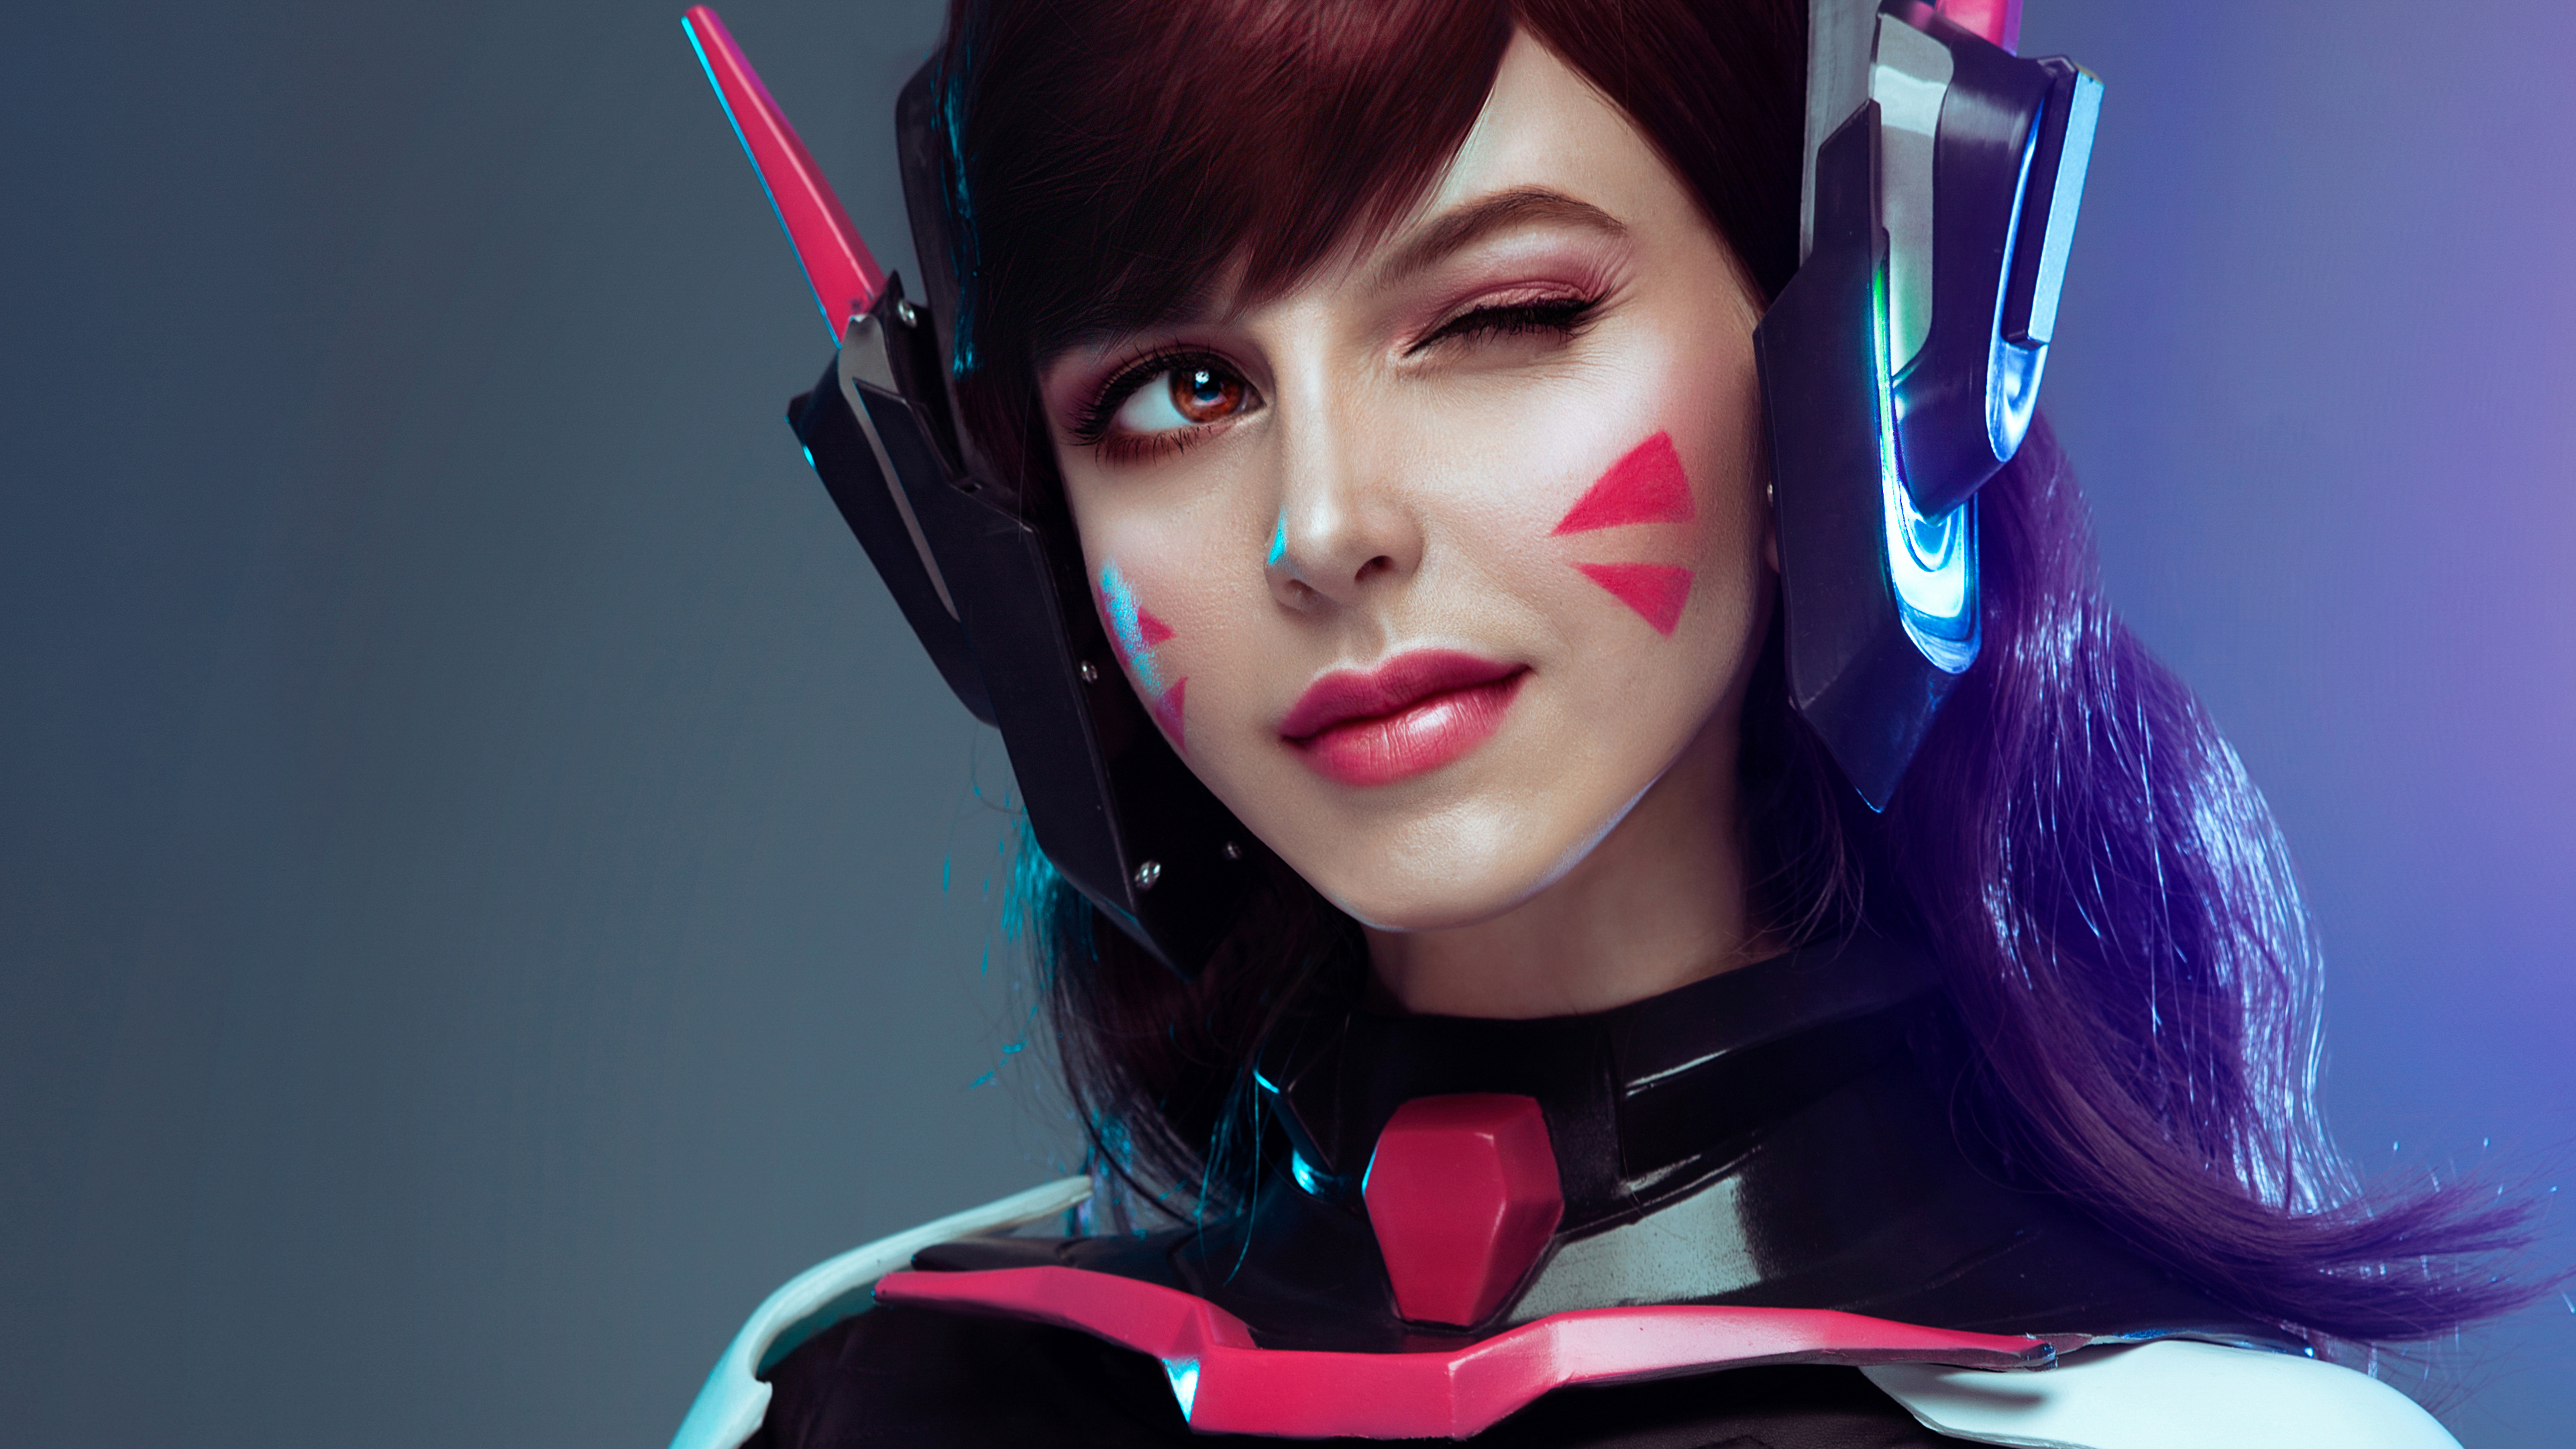 dva-from-overwatch-cosplay-hd-games-4k-wallpapers-images